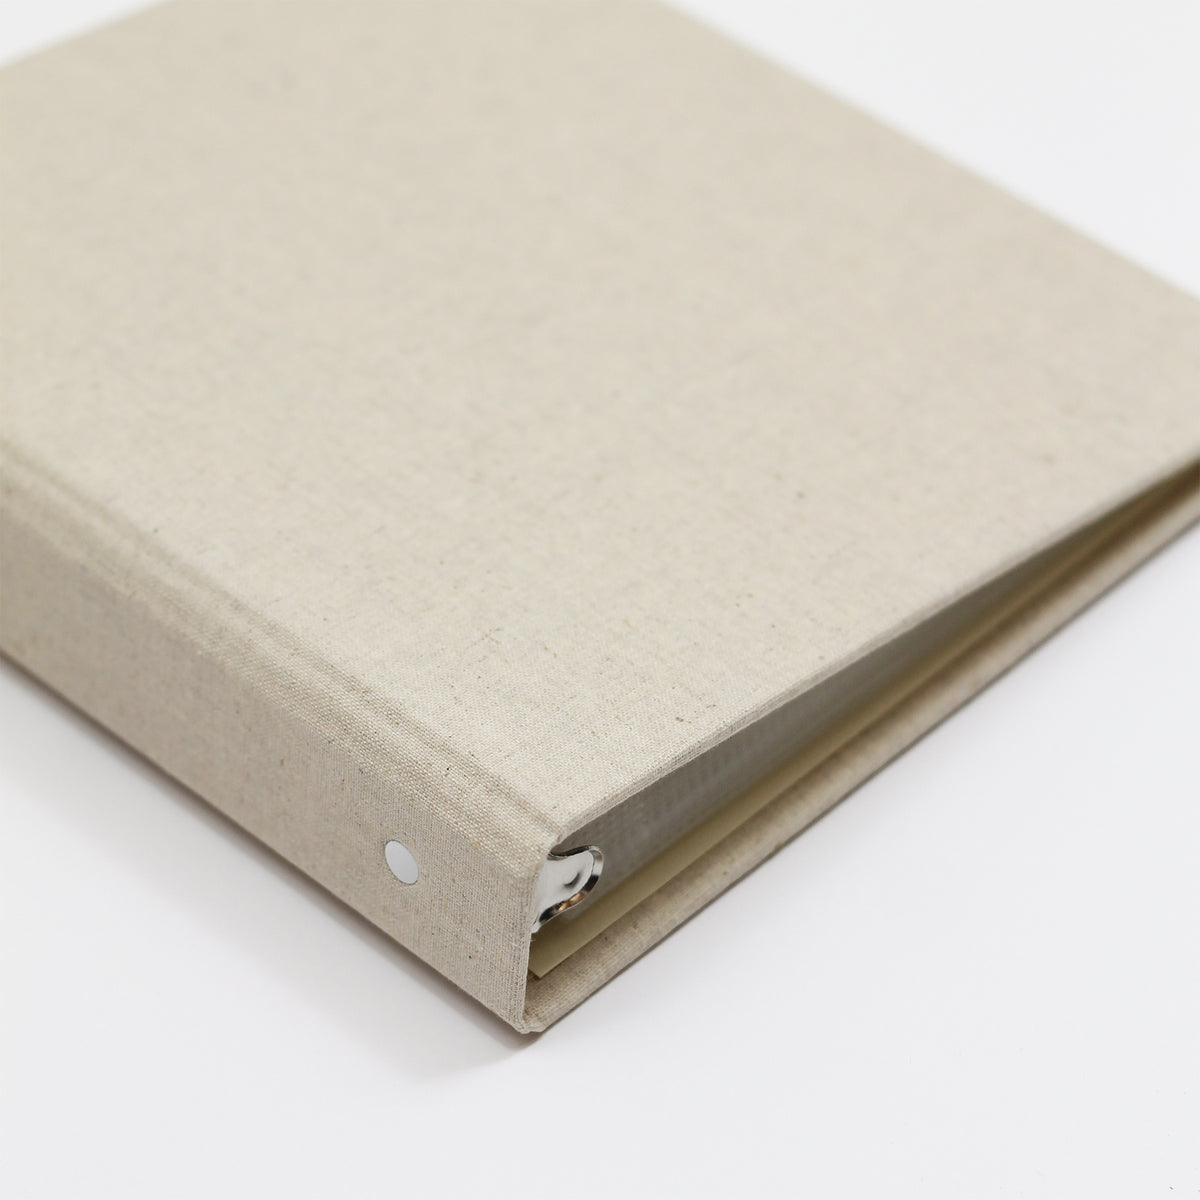 Large Photo Binder For 4x6 Photos | Cover: Natural Linen | Available Personalized